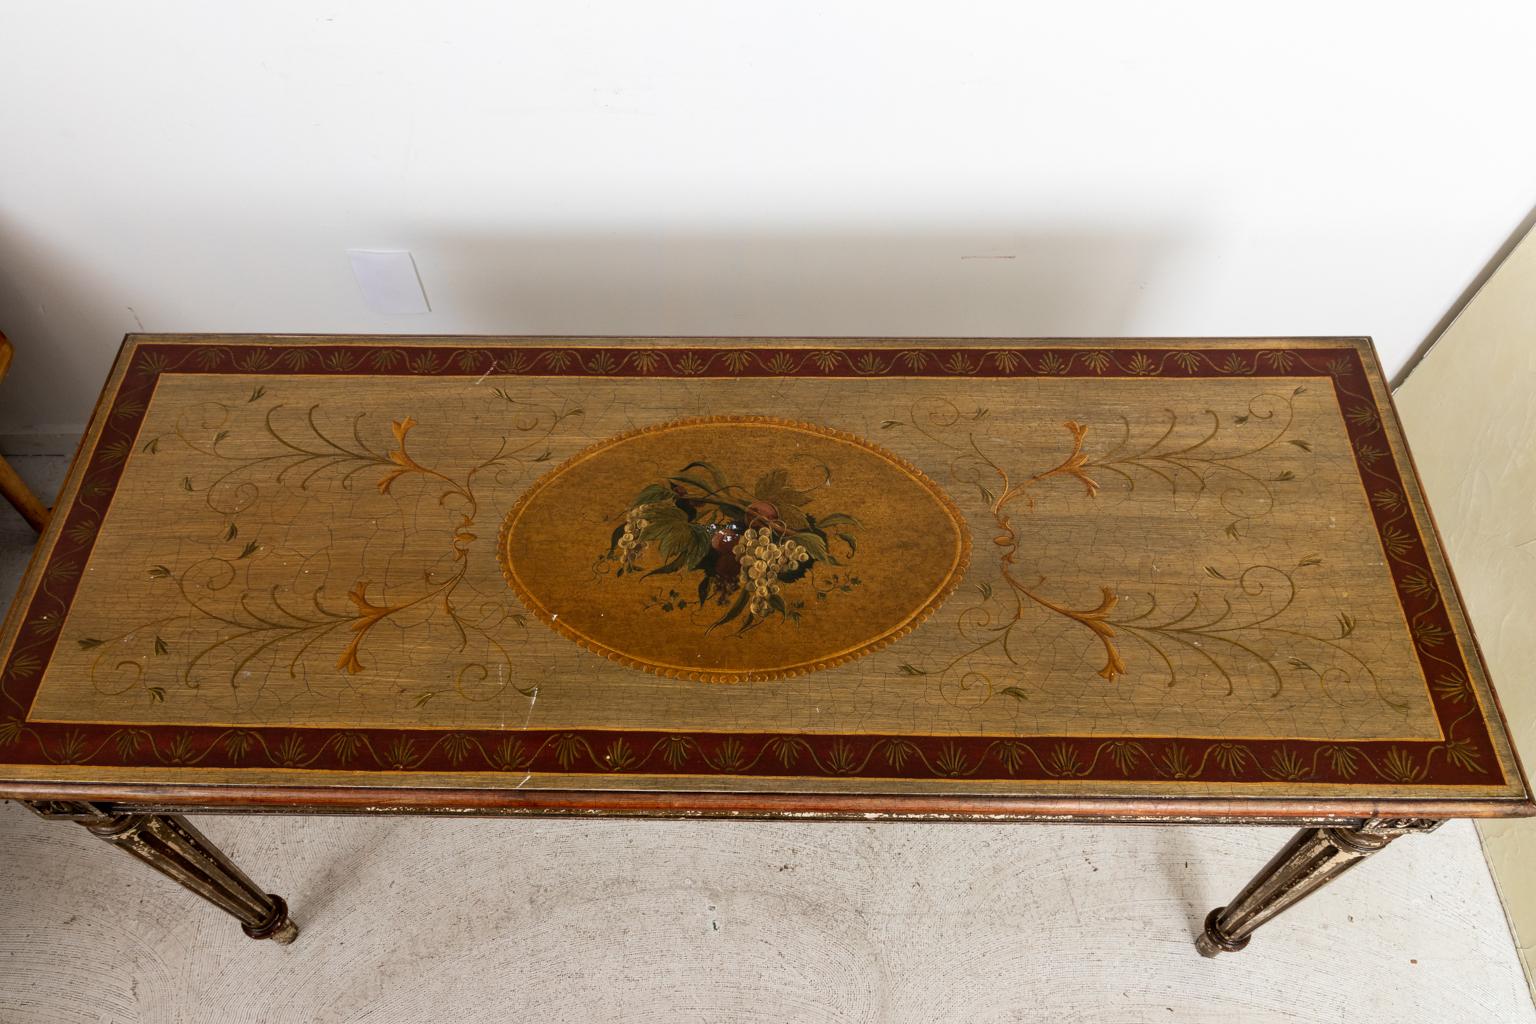 Italian style console table with fluted, turned legs on arrow feet. The table is also ornamented with a band of pierced disk trim on the apron and a tabletop painted with foliage and a center medallion of grapes. Please note of wear consistent with